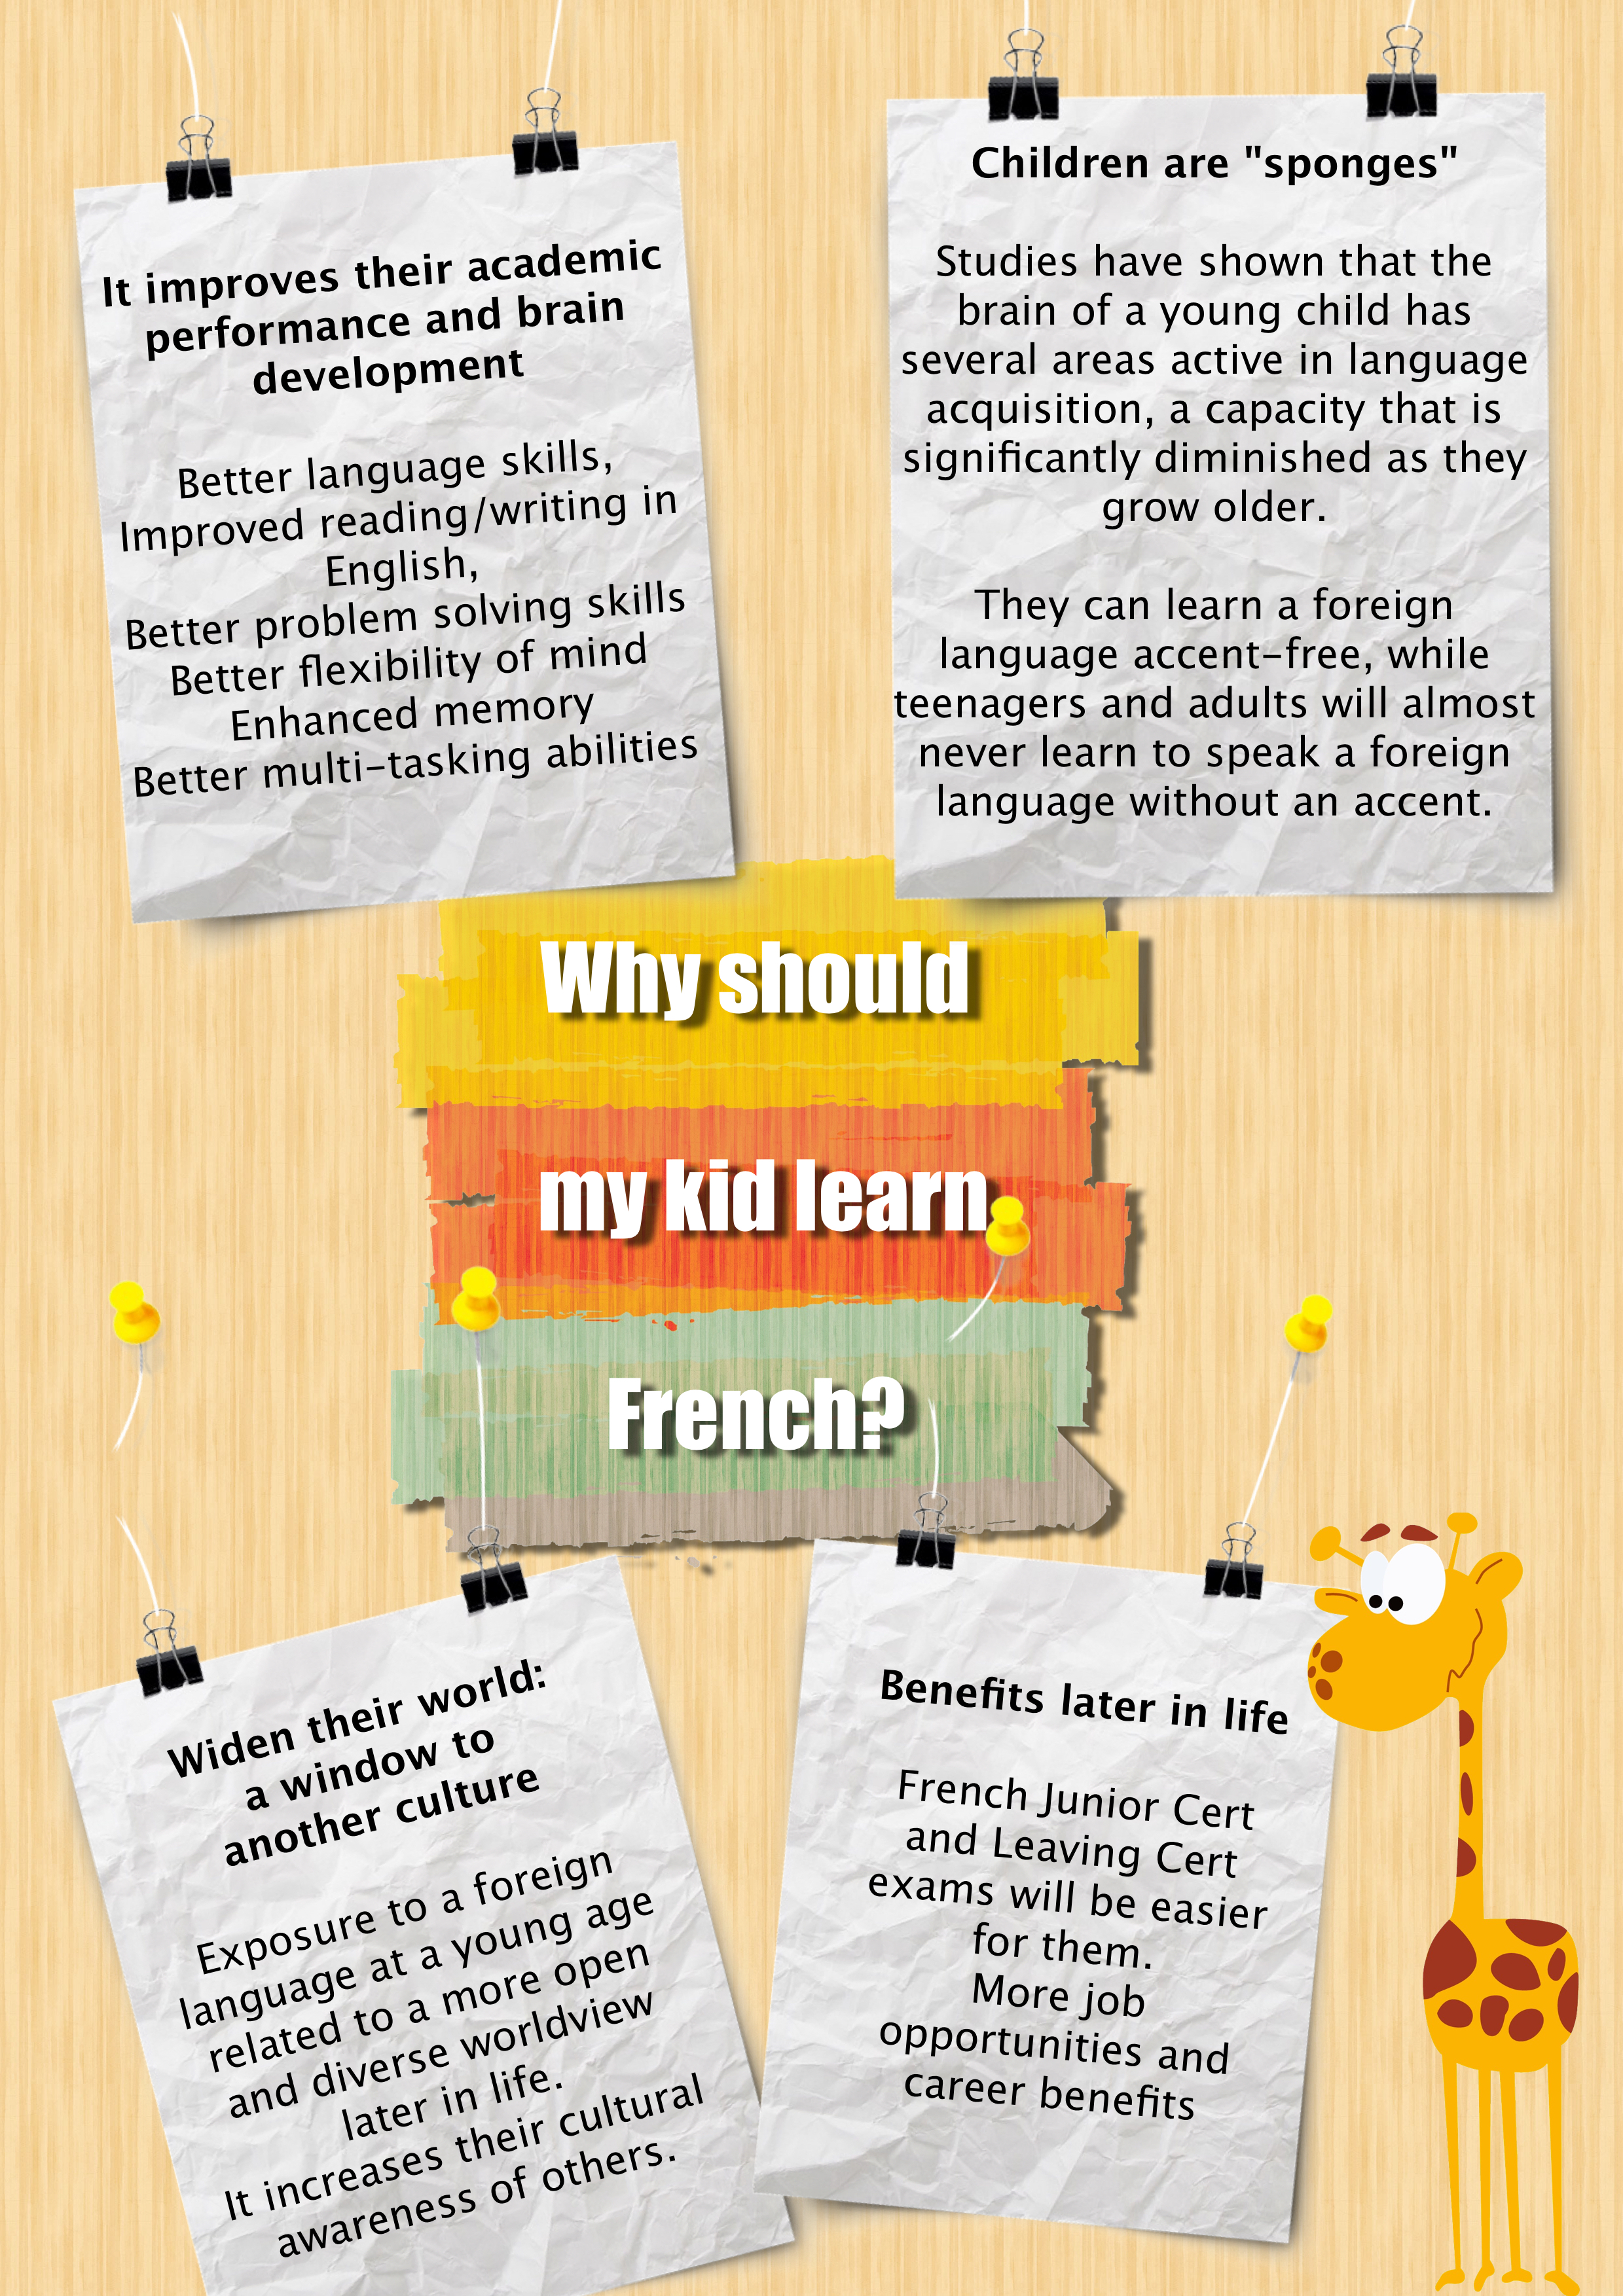 Why should my kid learn French